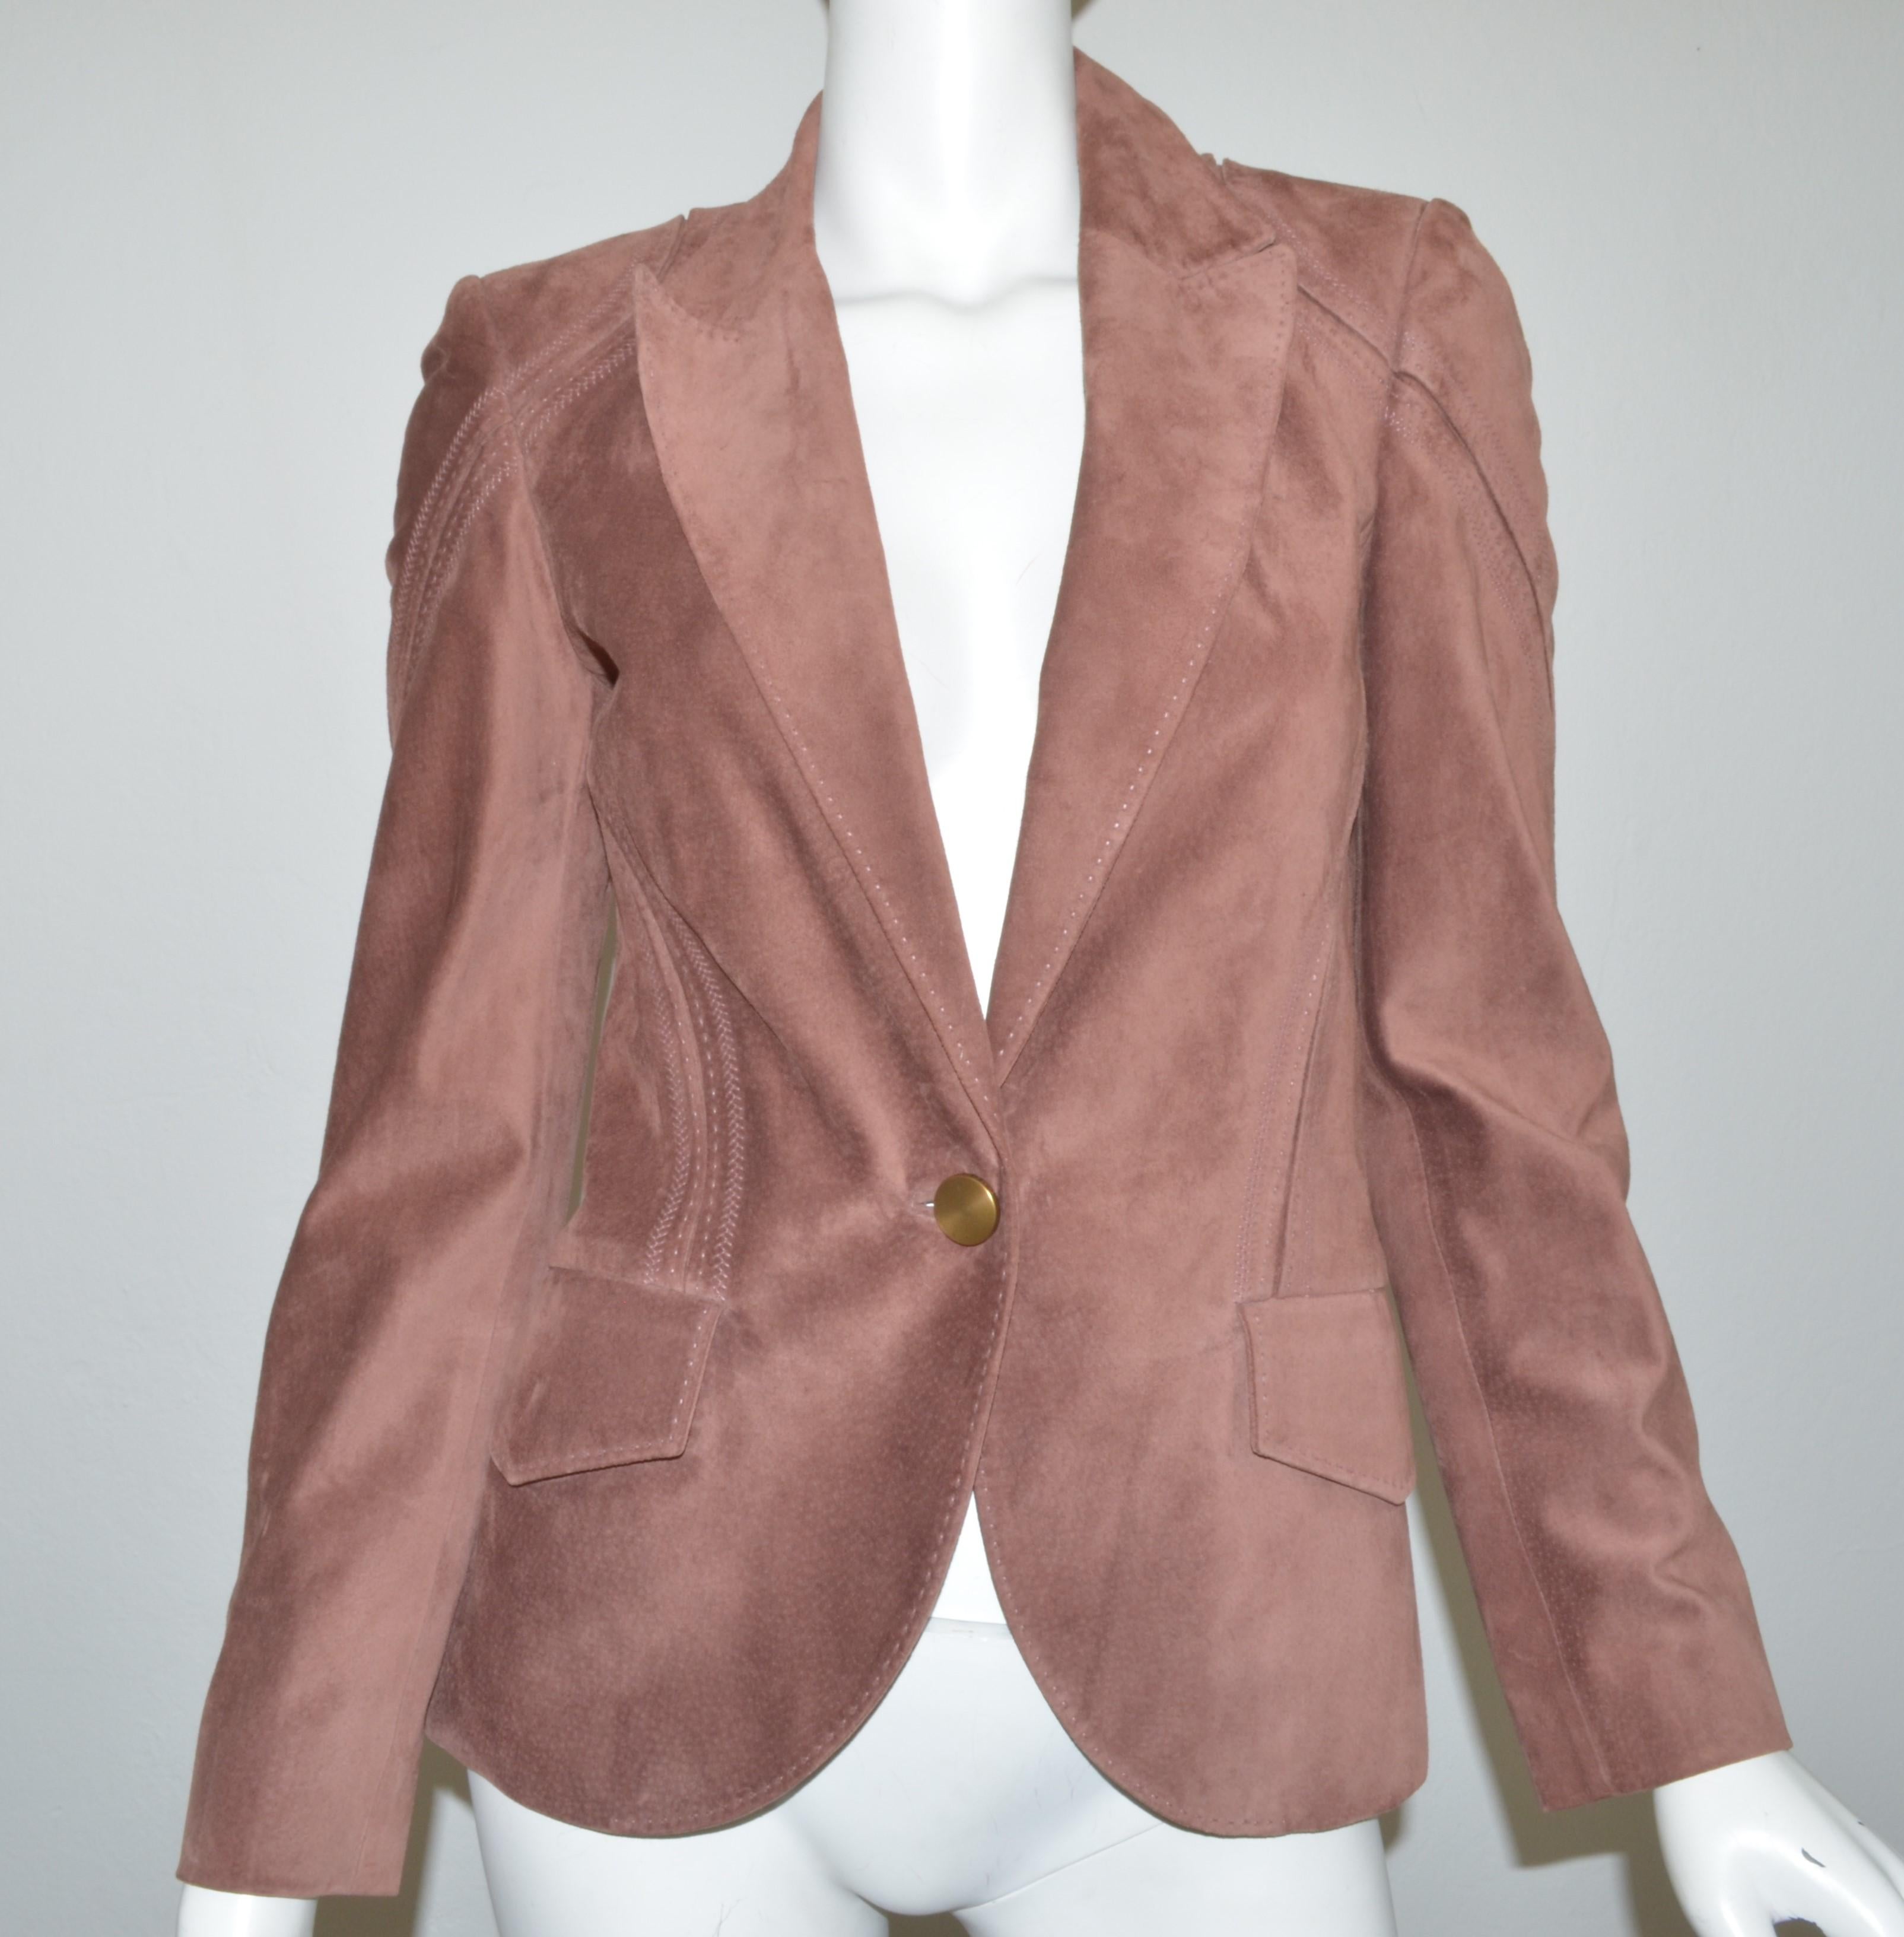 Gucci suede jacket featured in a mauve color with a single button closure and full lining. Jacket has two functional flap pockets. Size 40, Made in Italy.

Measurements:
Bust 33''
Sleeves 24''
Length 26''
Shoulder to shoulder 15''